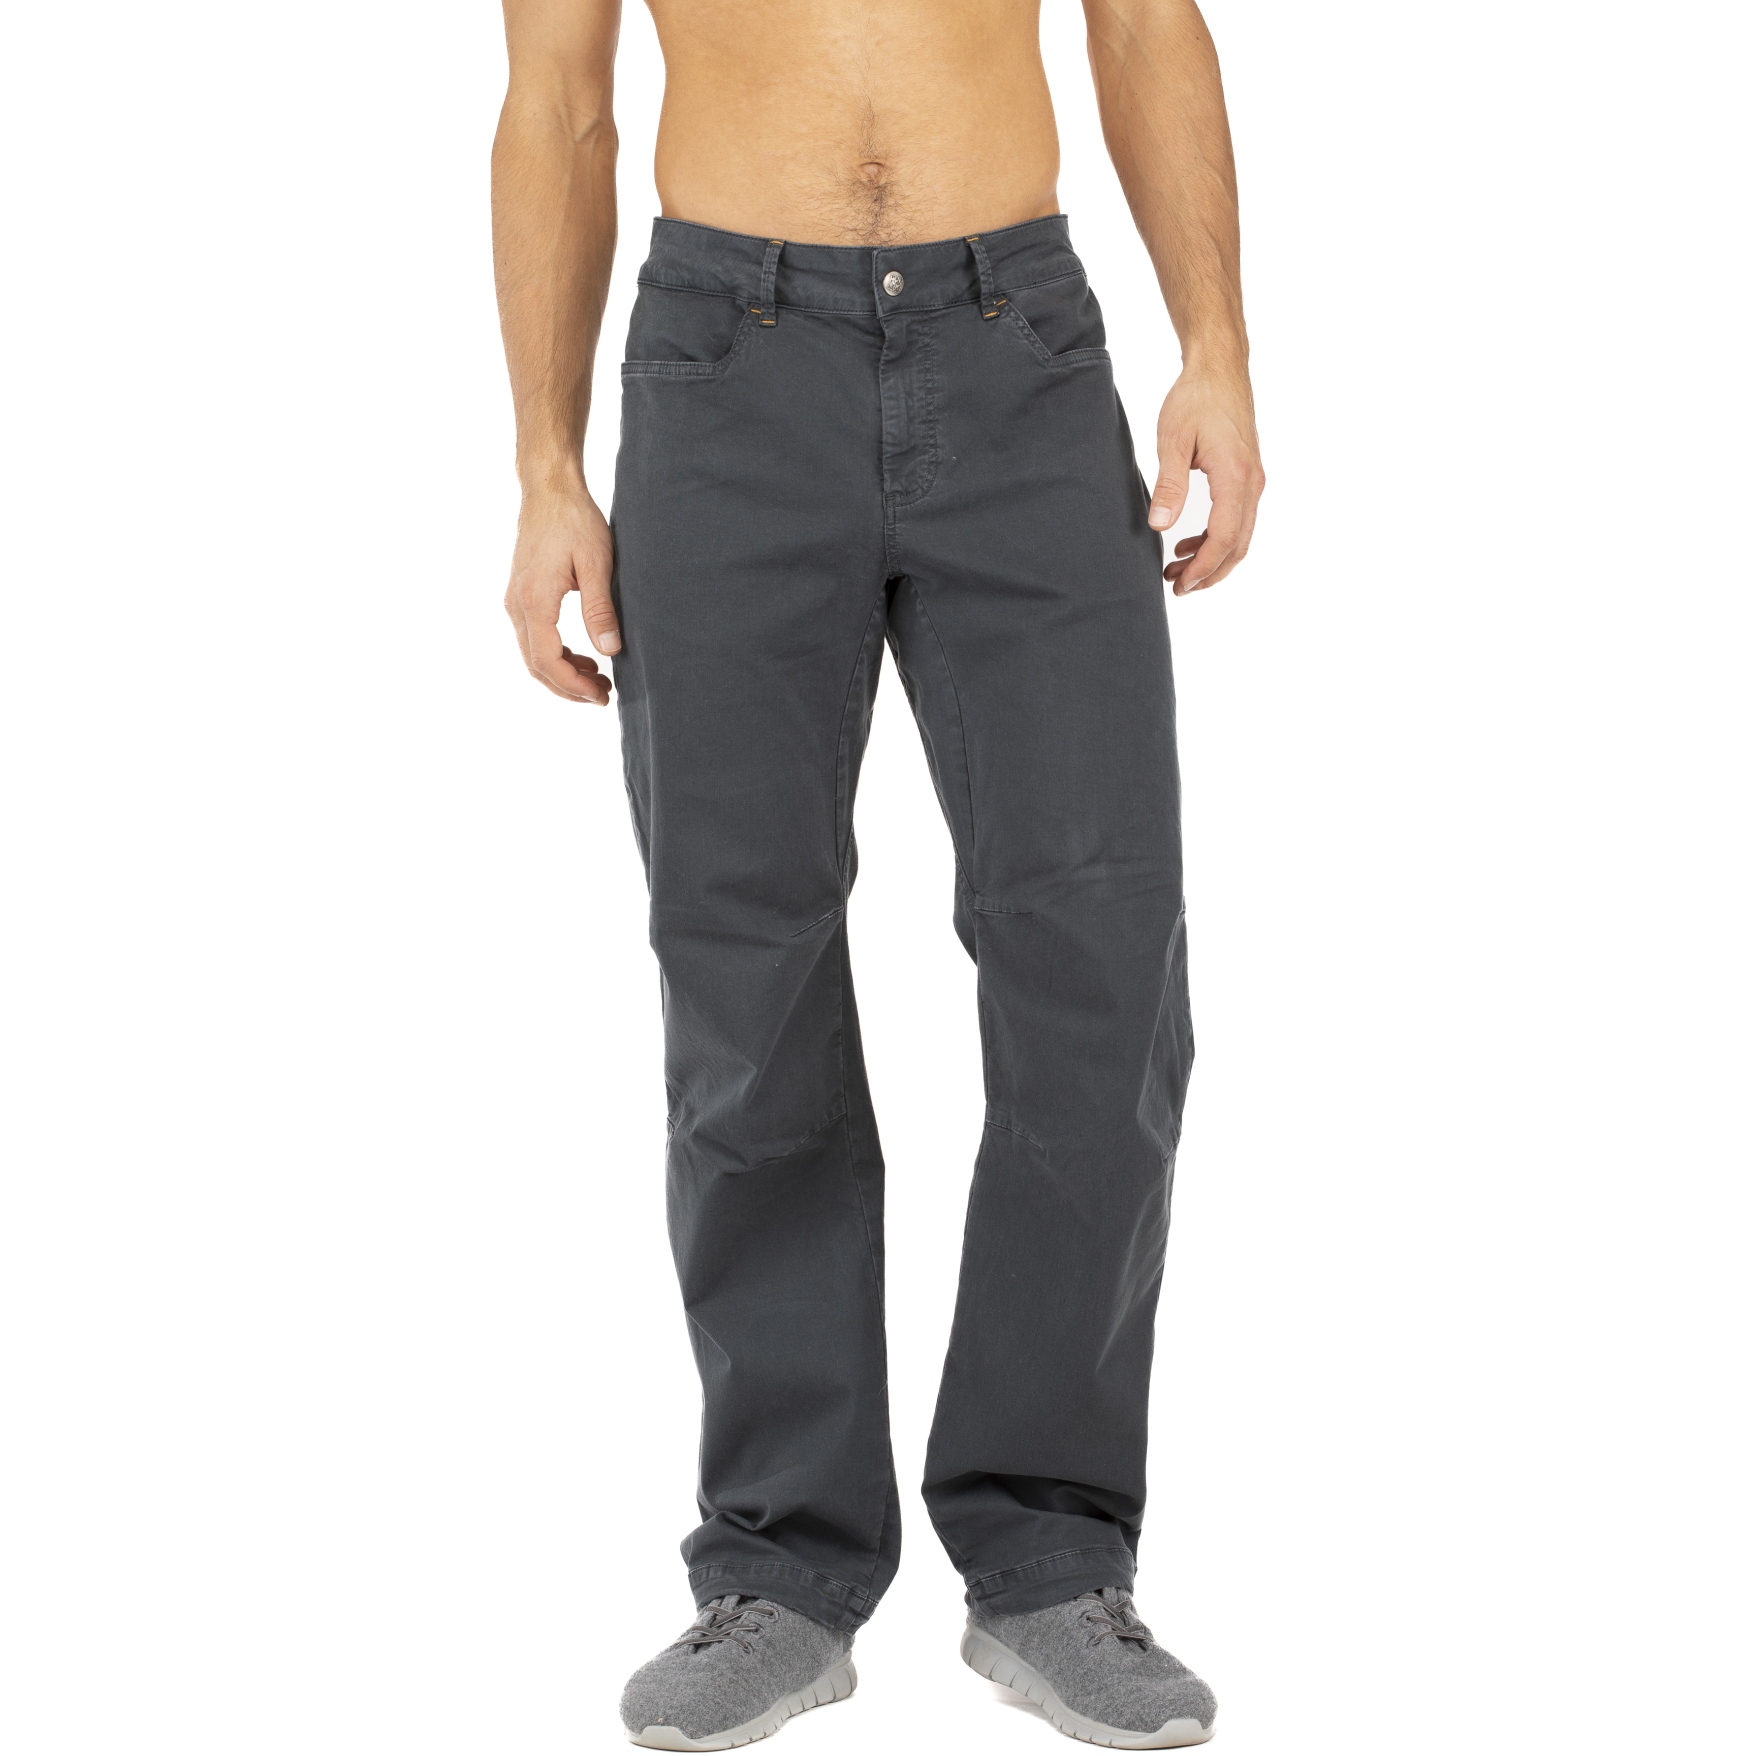 Picture of Chillaz Squamish Pants - grey blue